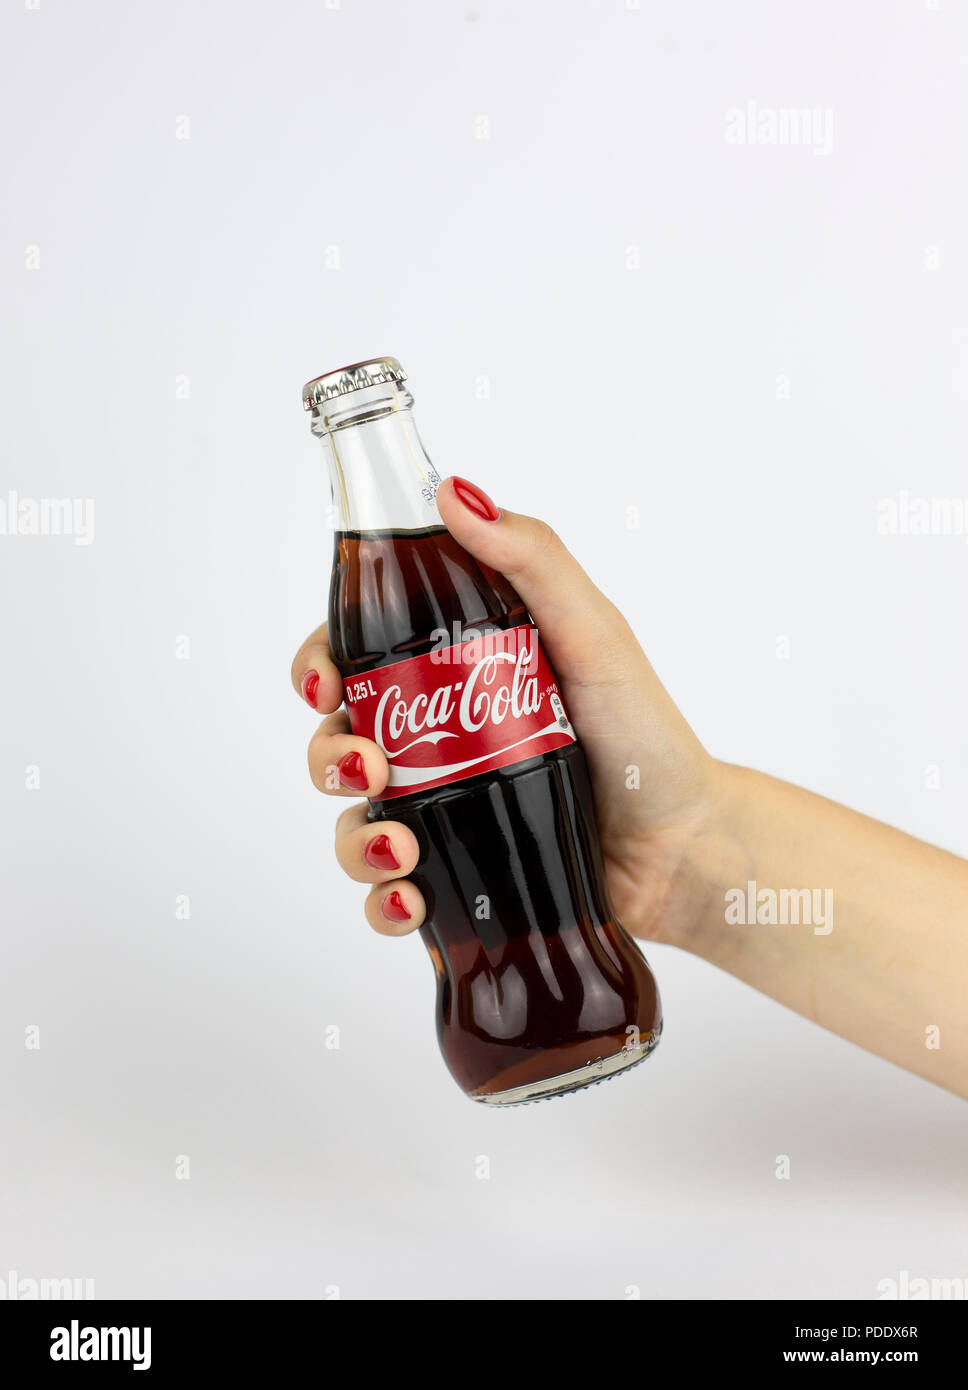 Atlanta, Georgia, USA - July 22, 2018: woman hand with red nails holding glass coca-cola contour classic bottle from Italy on white background Stock Photo